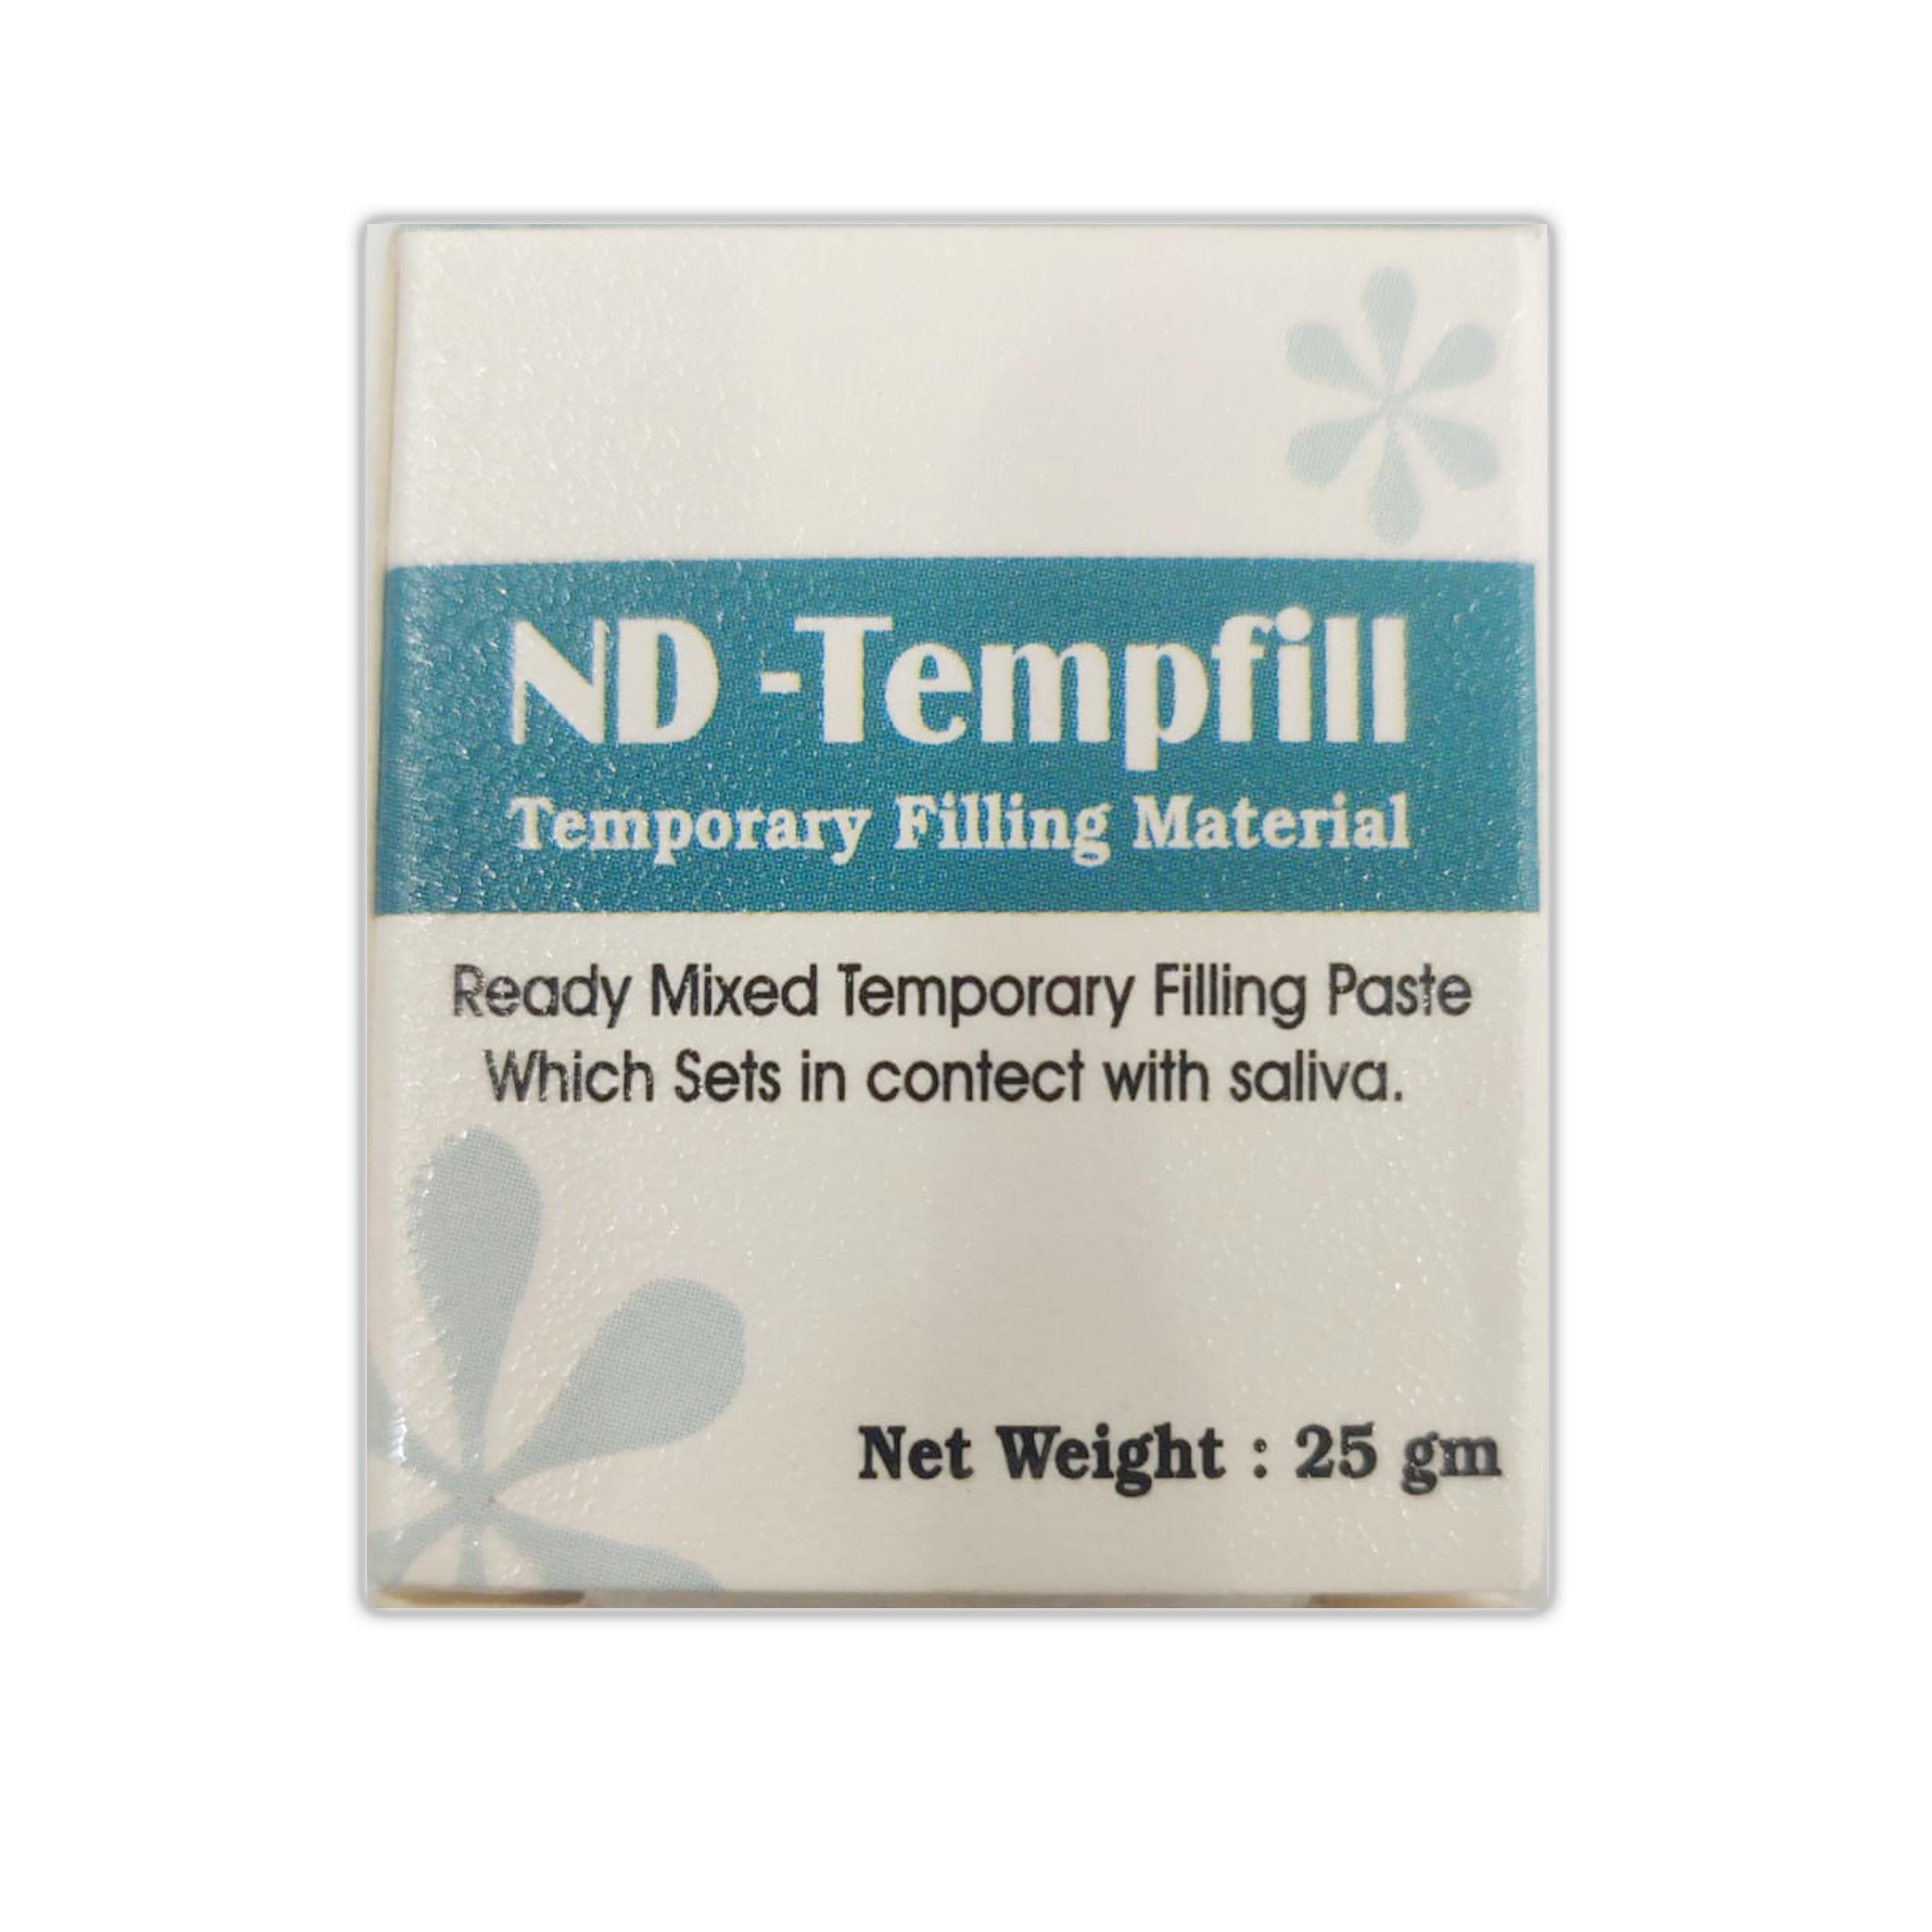 ND Tempfill( Temporary Filling Material)